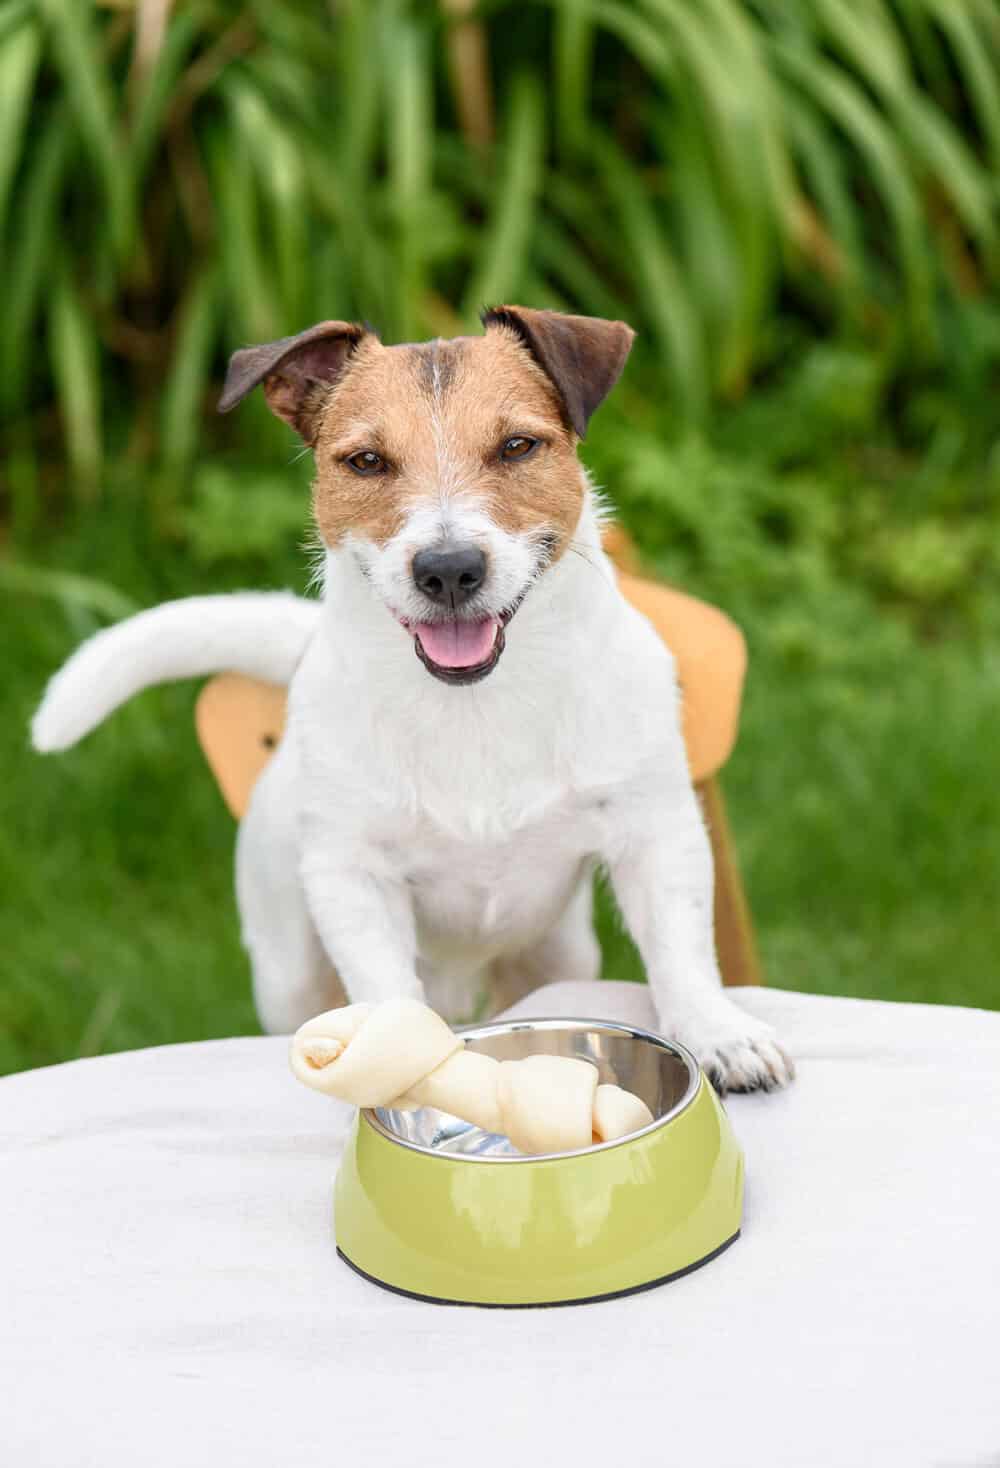 Jack Russell Terrier with doggy treat